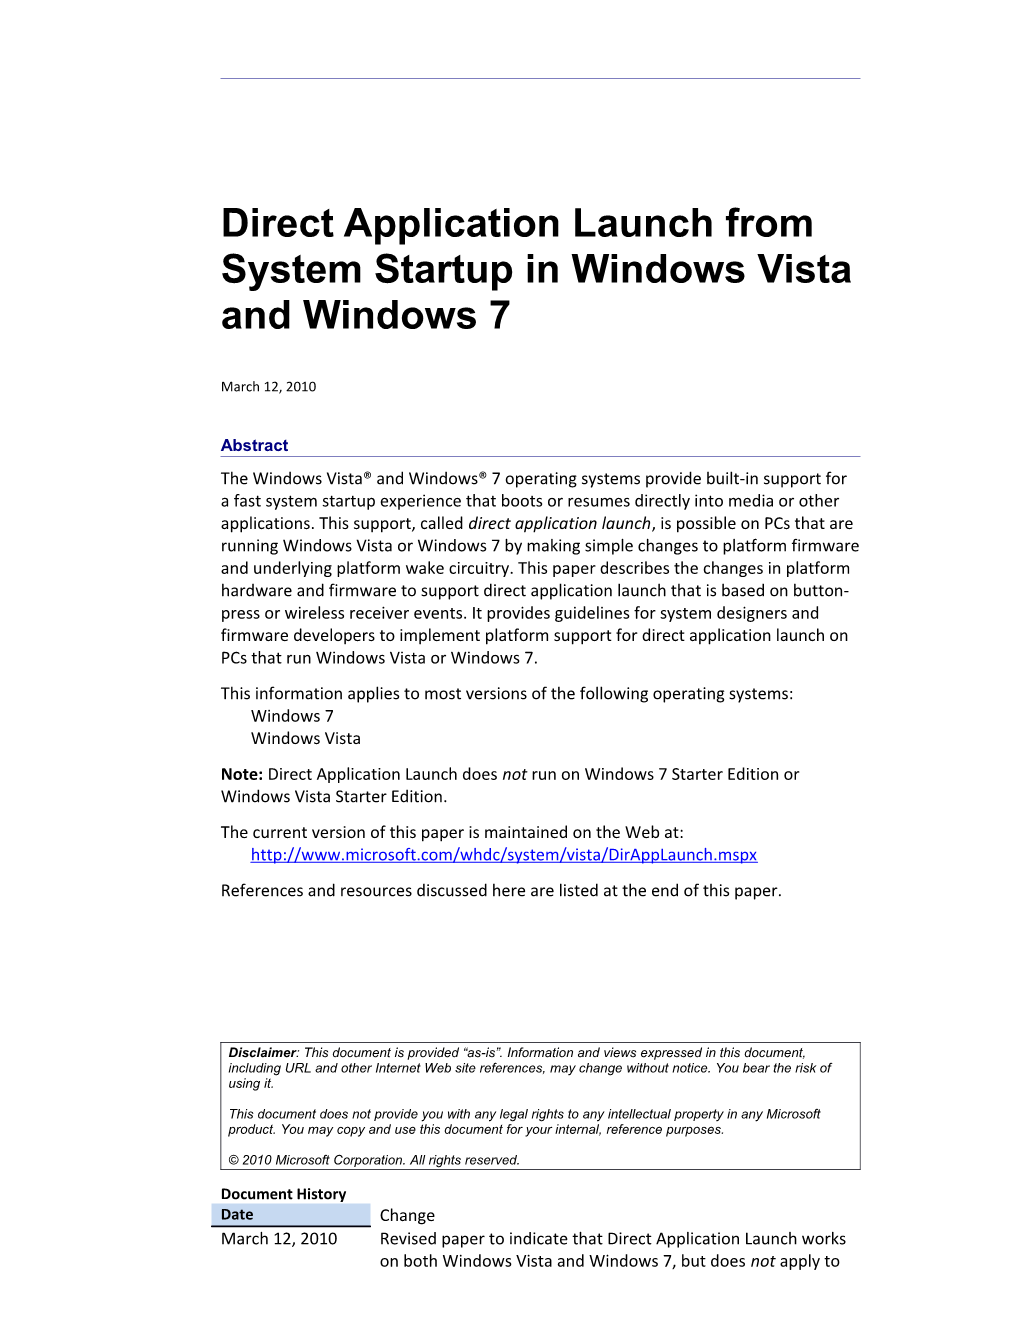 Direct Application Launch from System Startup in Windows Vista and Windows 7 - 1